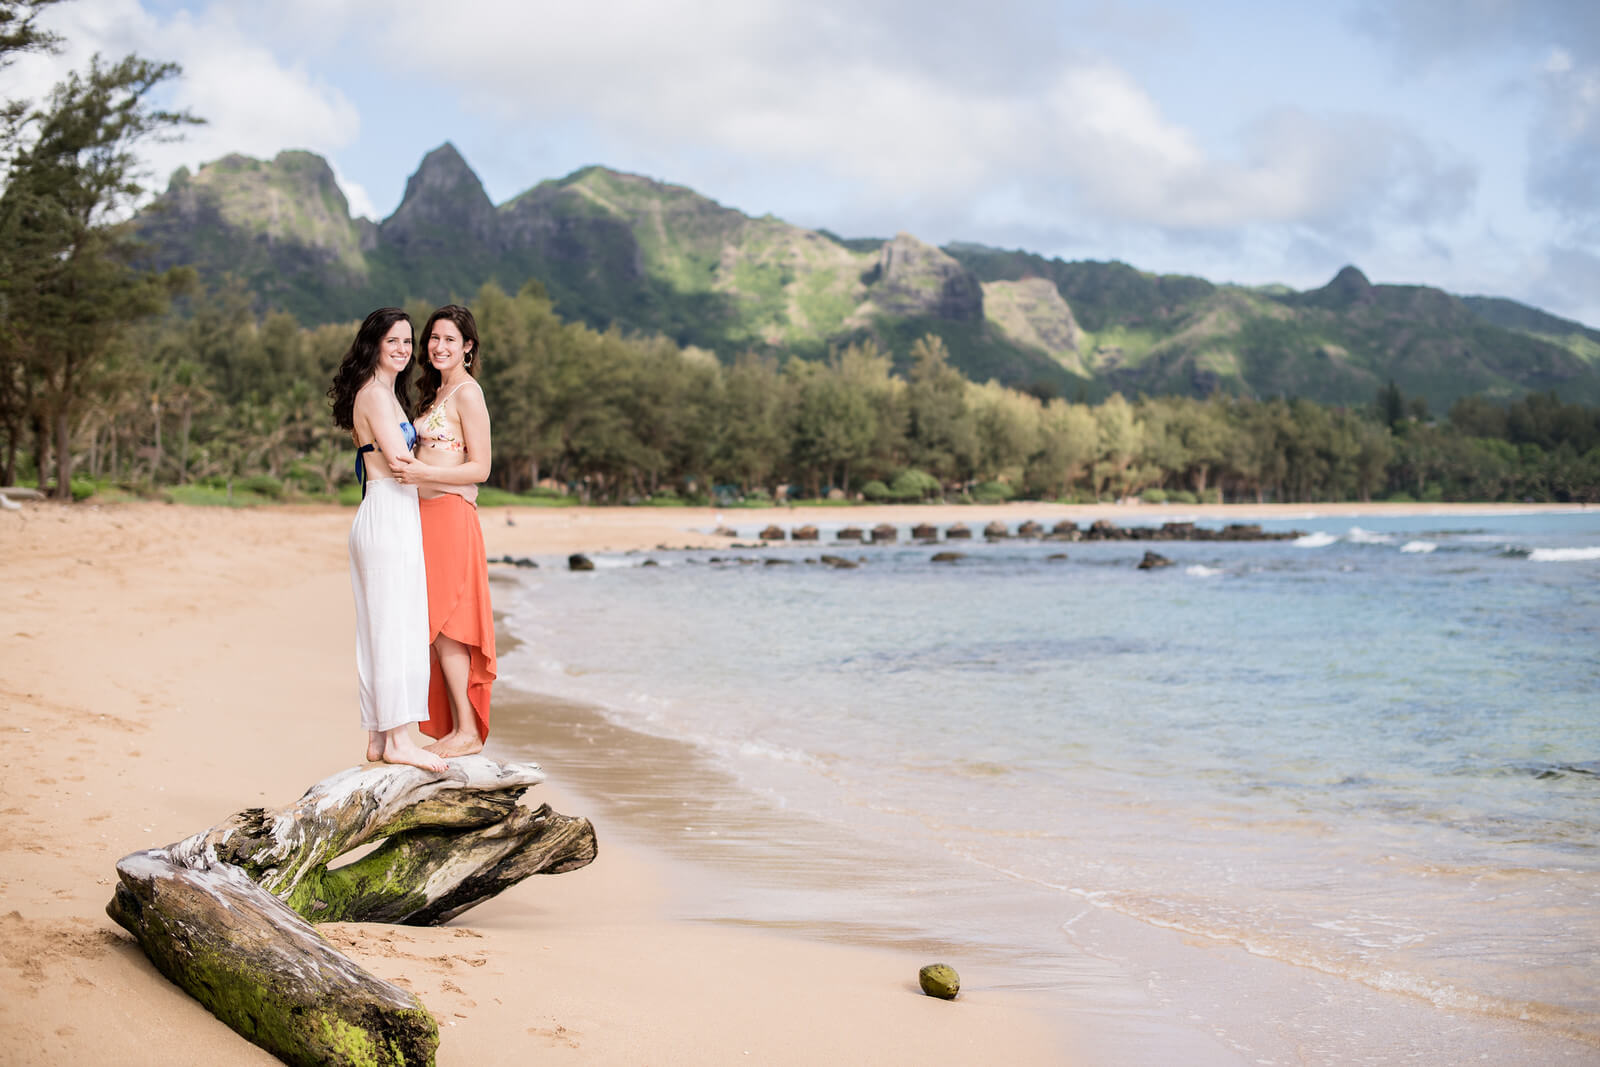 Hawaii Calling: Your Ticket to Unforgettable Travel